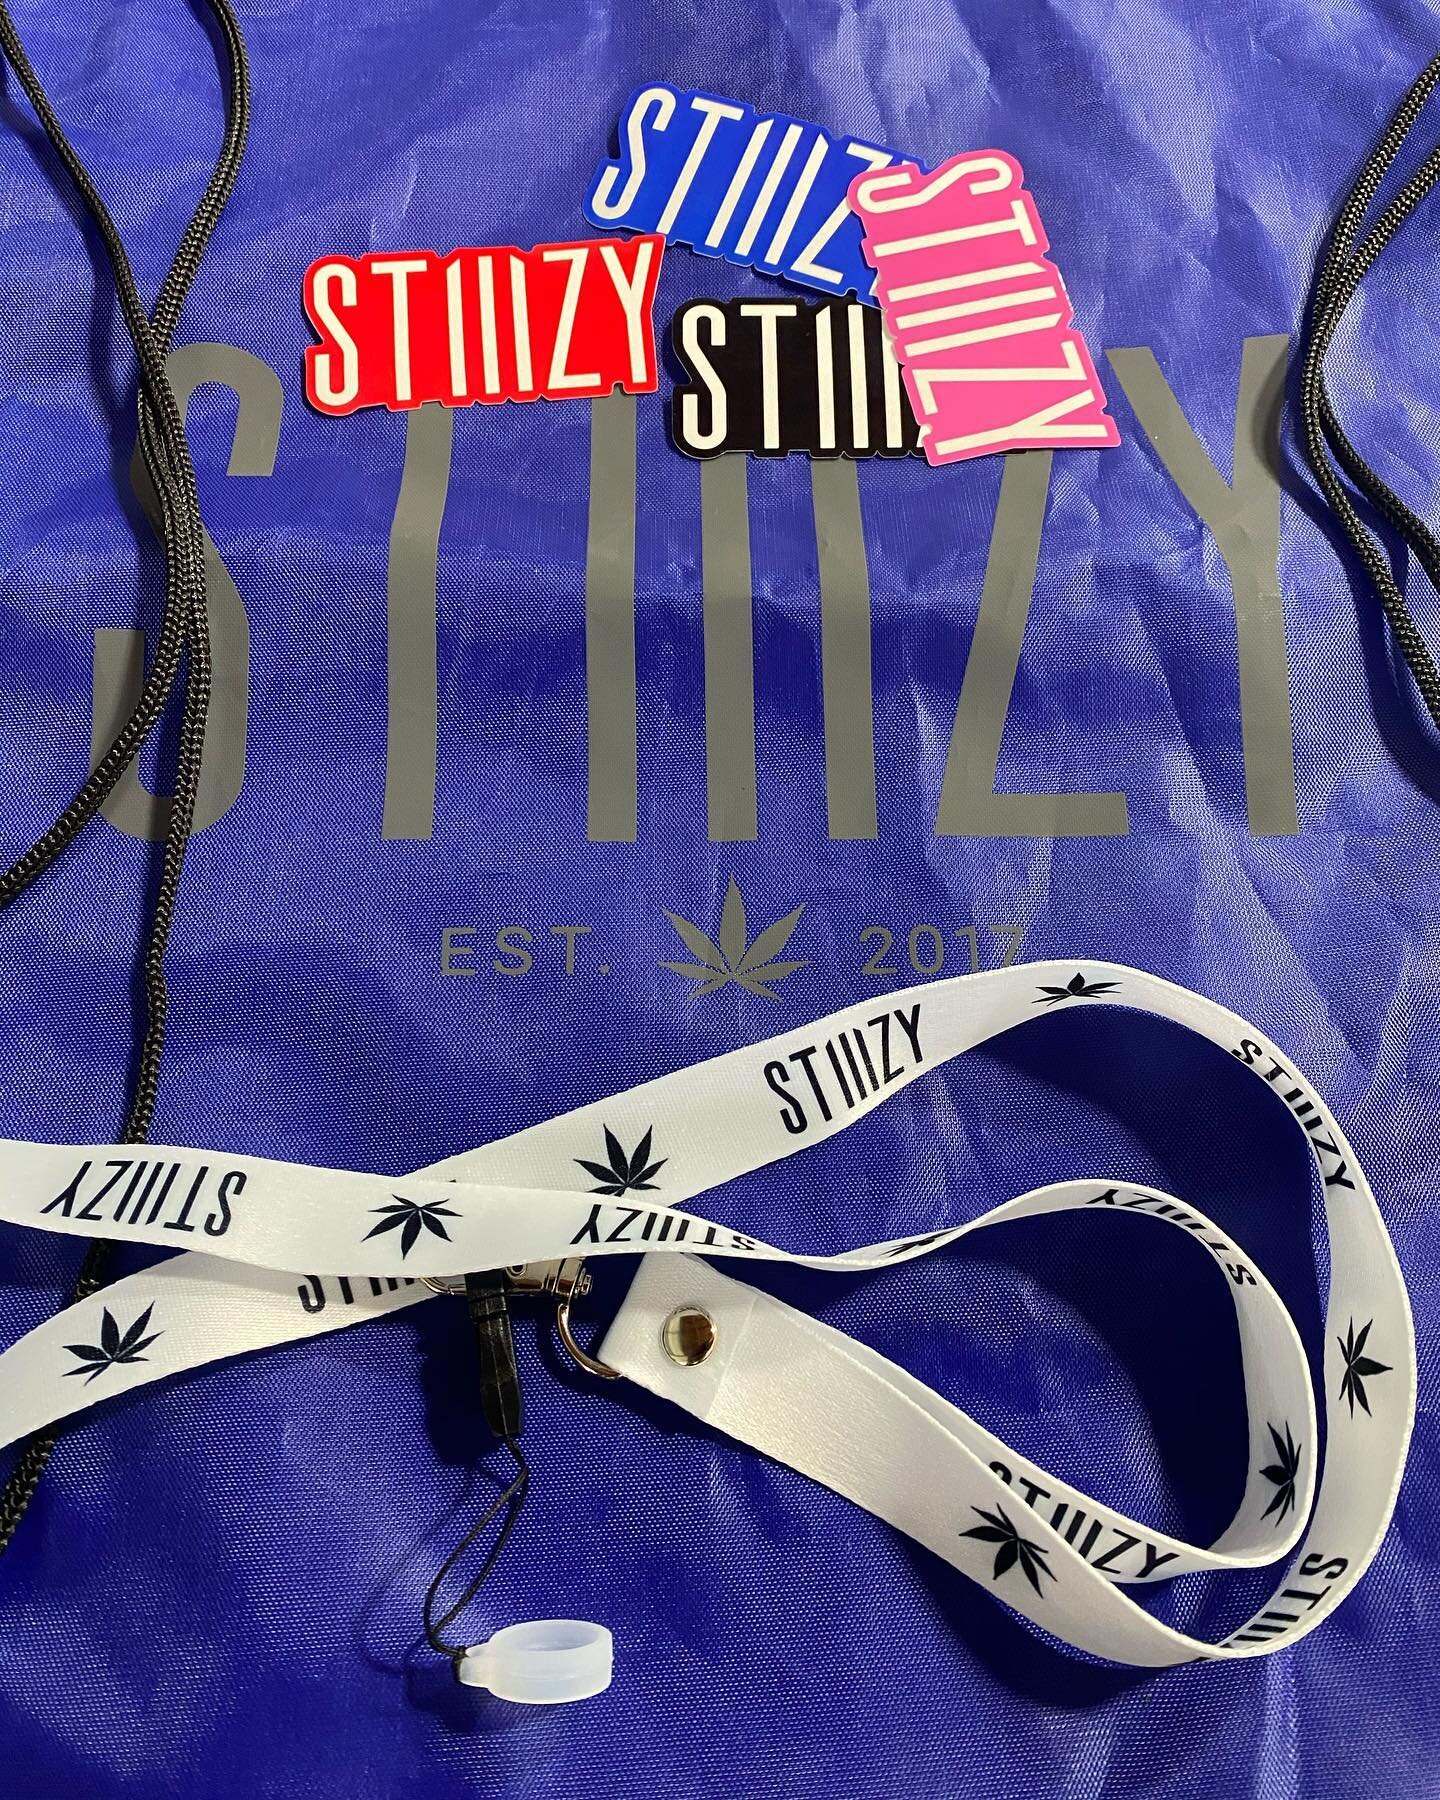 Who wants to win some @stiiizy Swag!!! Tag 3 other Stiiizy Lovers for your chance to win a Stiiizy Gym sac, Lanyard and a couple stickers!! 
Must be-
21 or older
Central Coast resident 

Thanks for playing!!!
#centralcoastcannabiscommunity #centralco